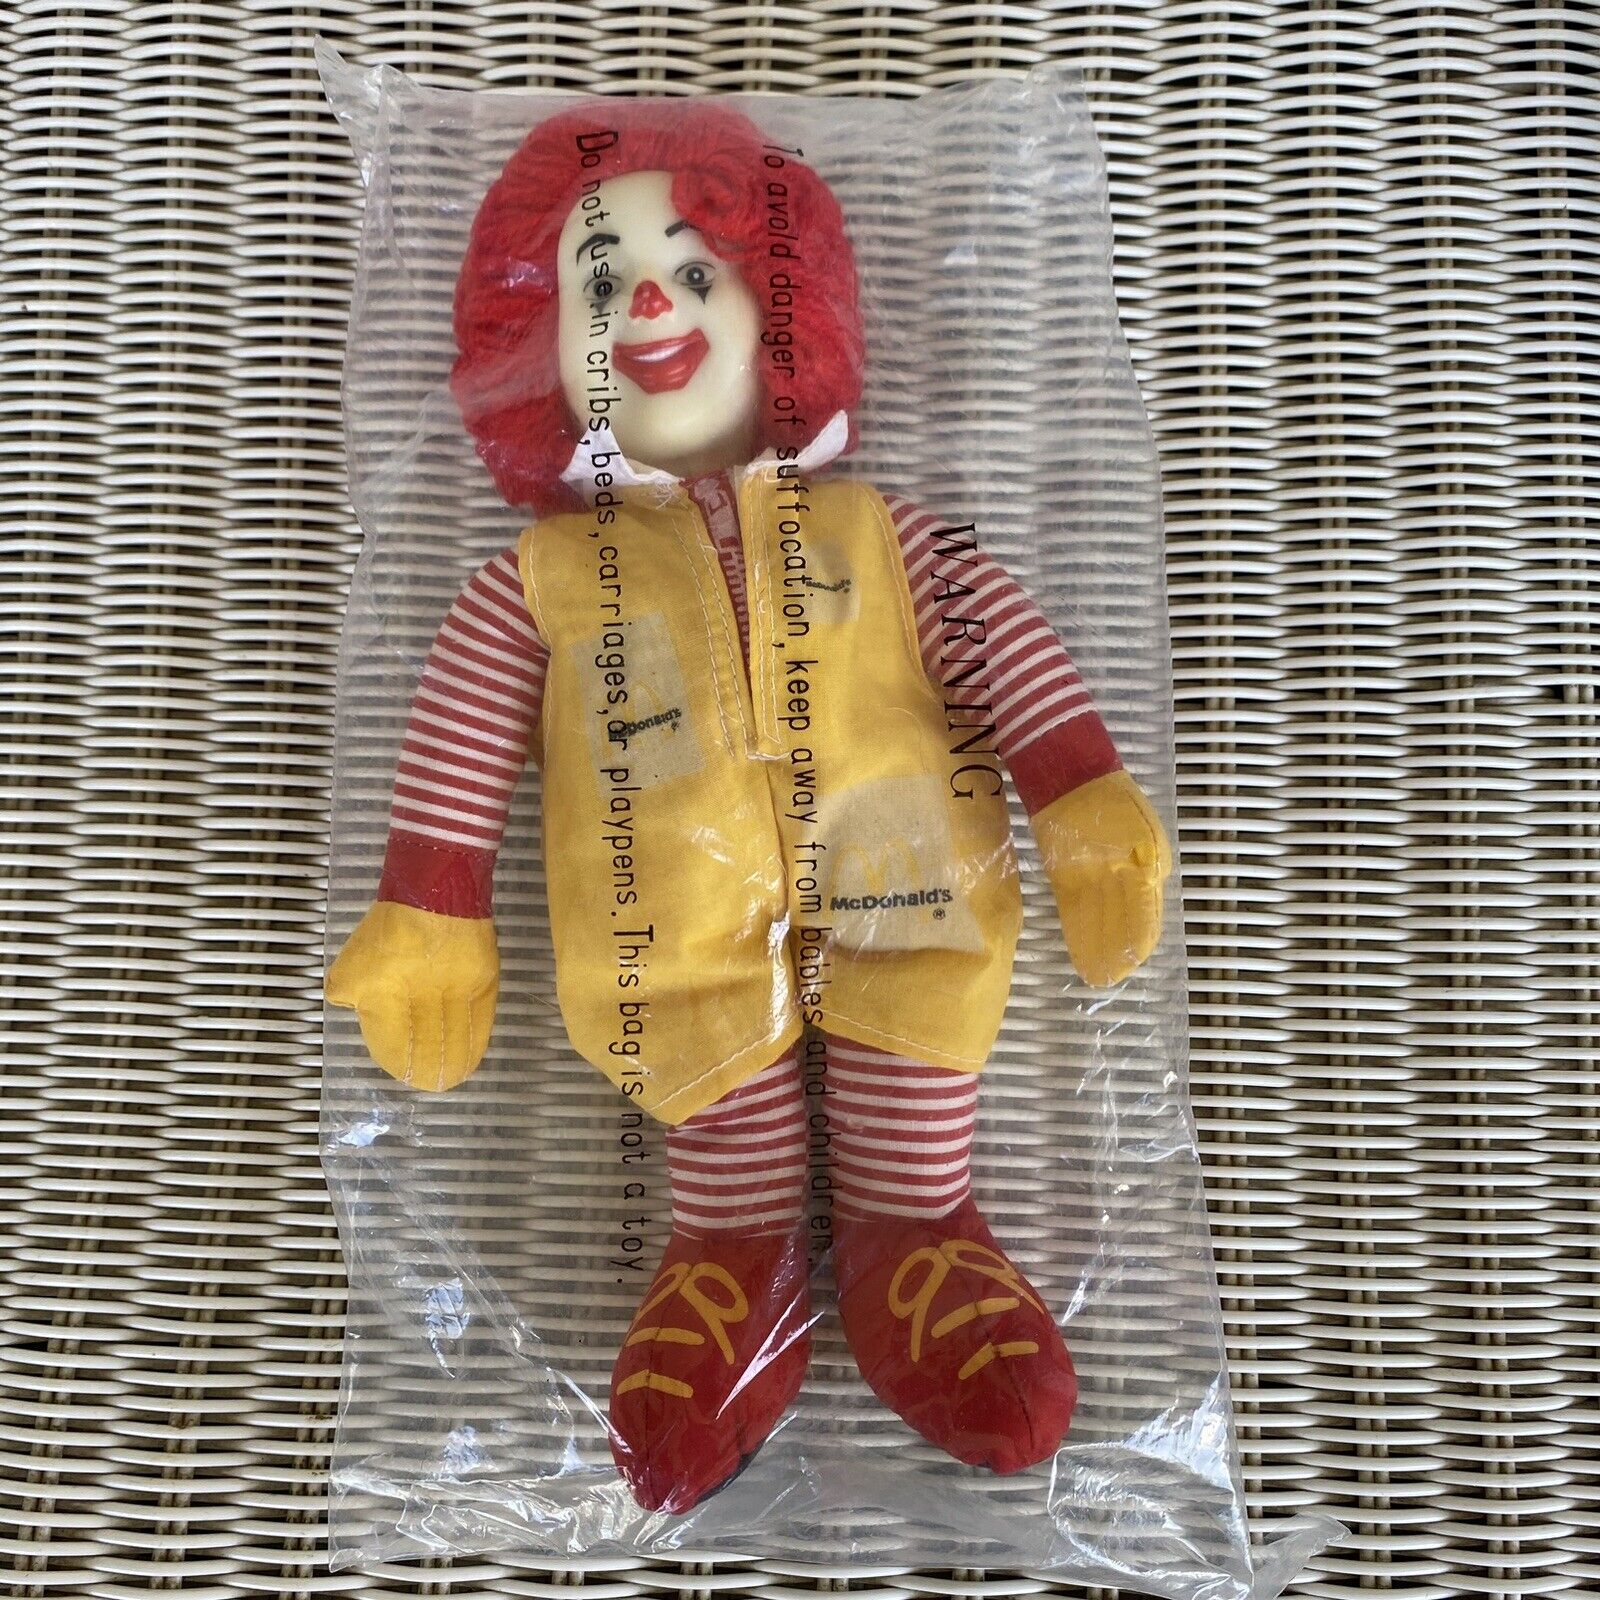 Vintage Sealed Ronald McDonald Plush Doll From The 80s - 